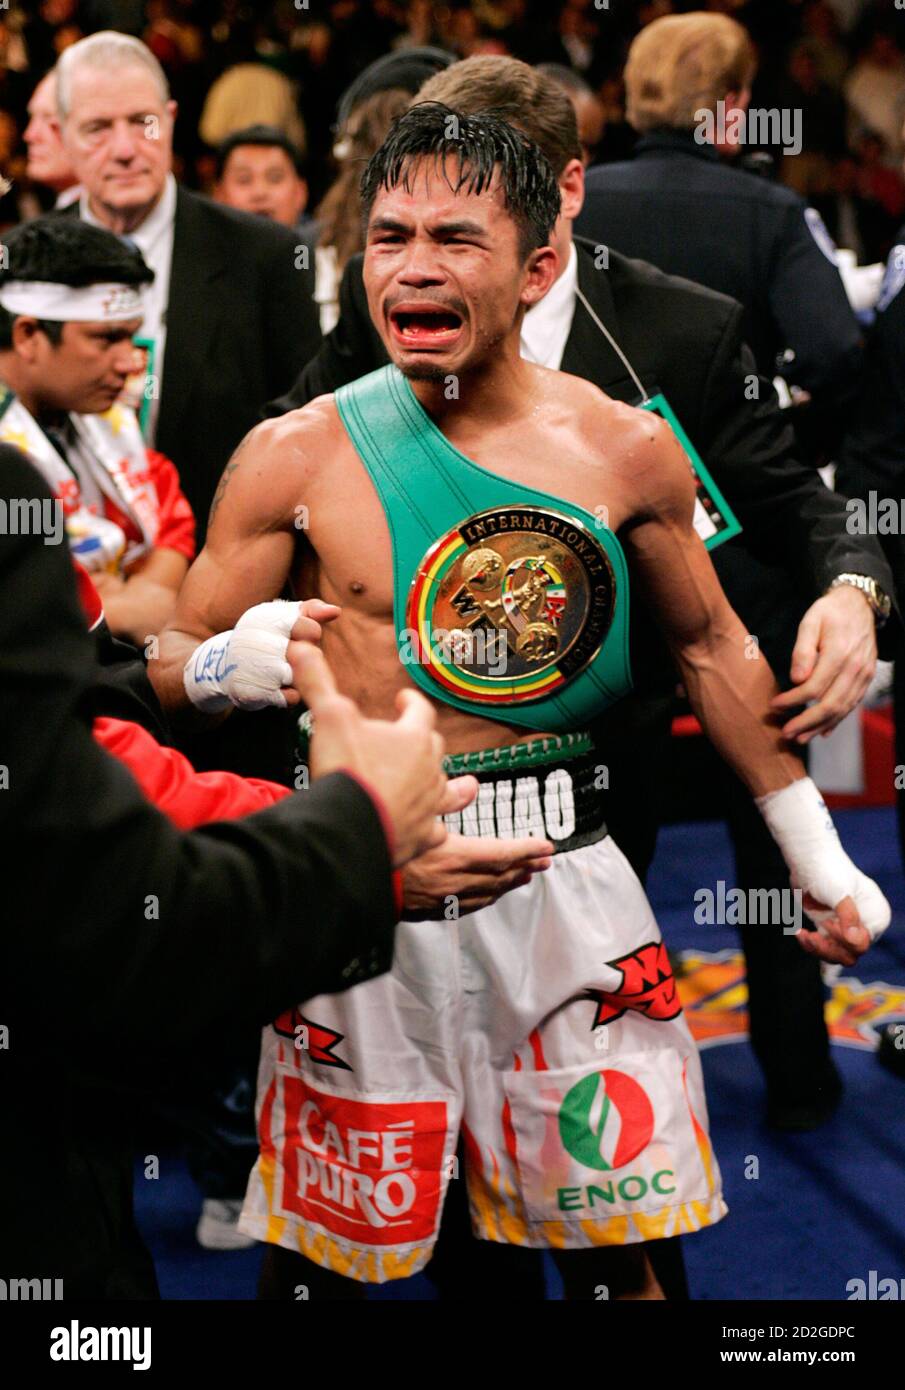 Super featherweight boxer Manny Pacquiao of Cebu City, Philippines, celebrates his victory over Erik Morales of Tijuana, Mexico, at the Thomas & Mack Center in Las Vegas January 21, 2006. Pacquiao won the fight with a 10th round TKO. REUTERS/Steve Marcus Stock Photo